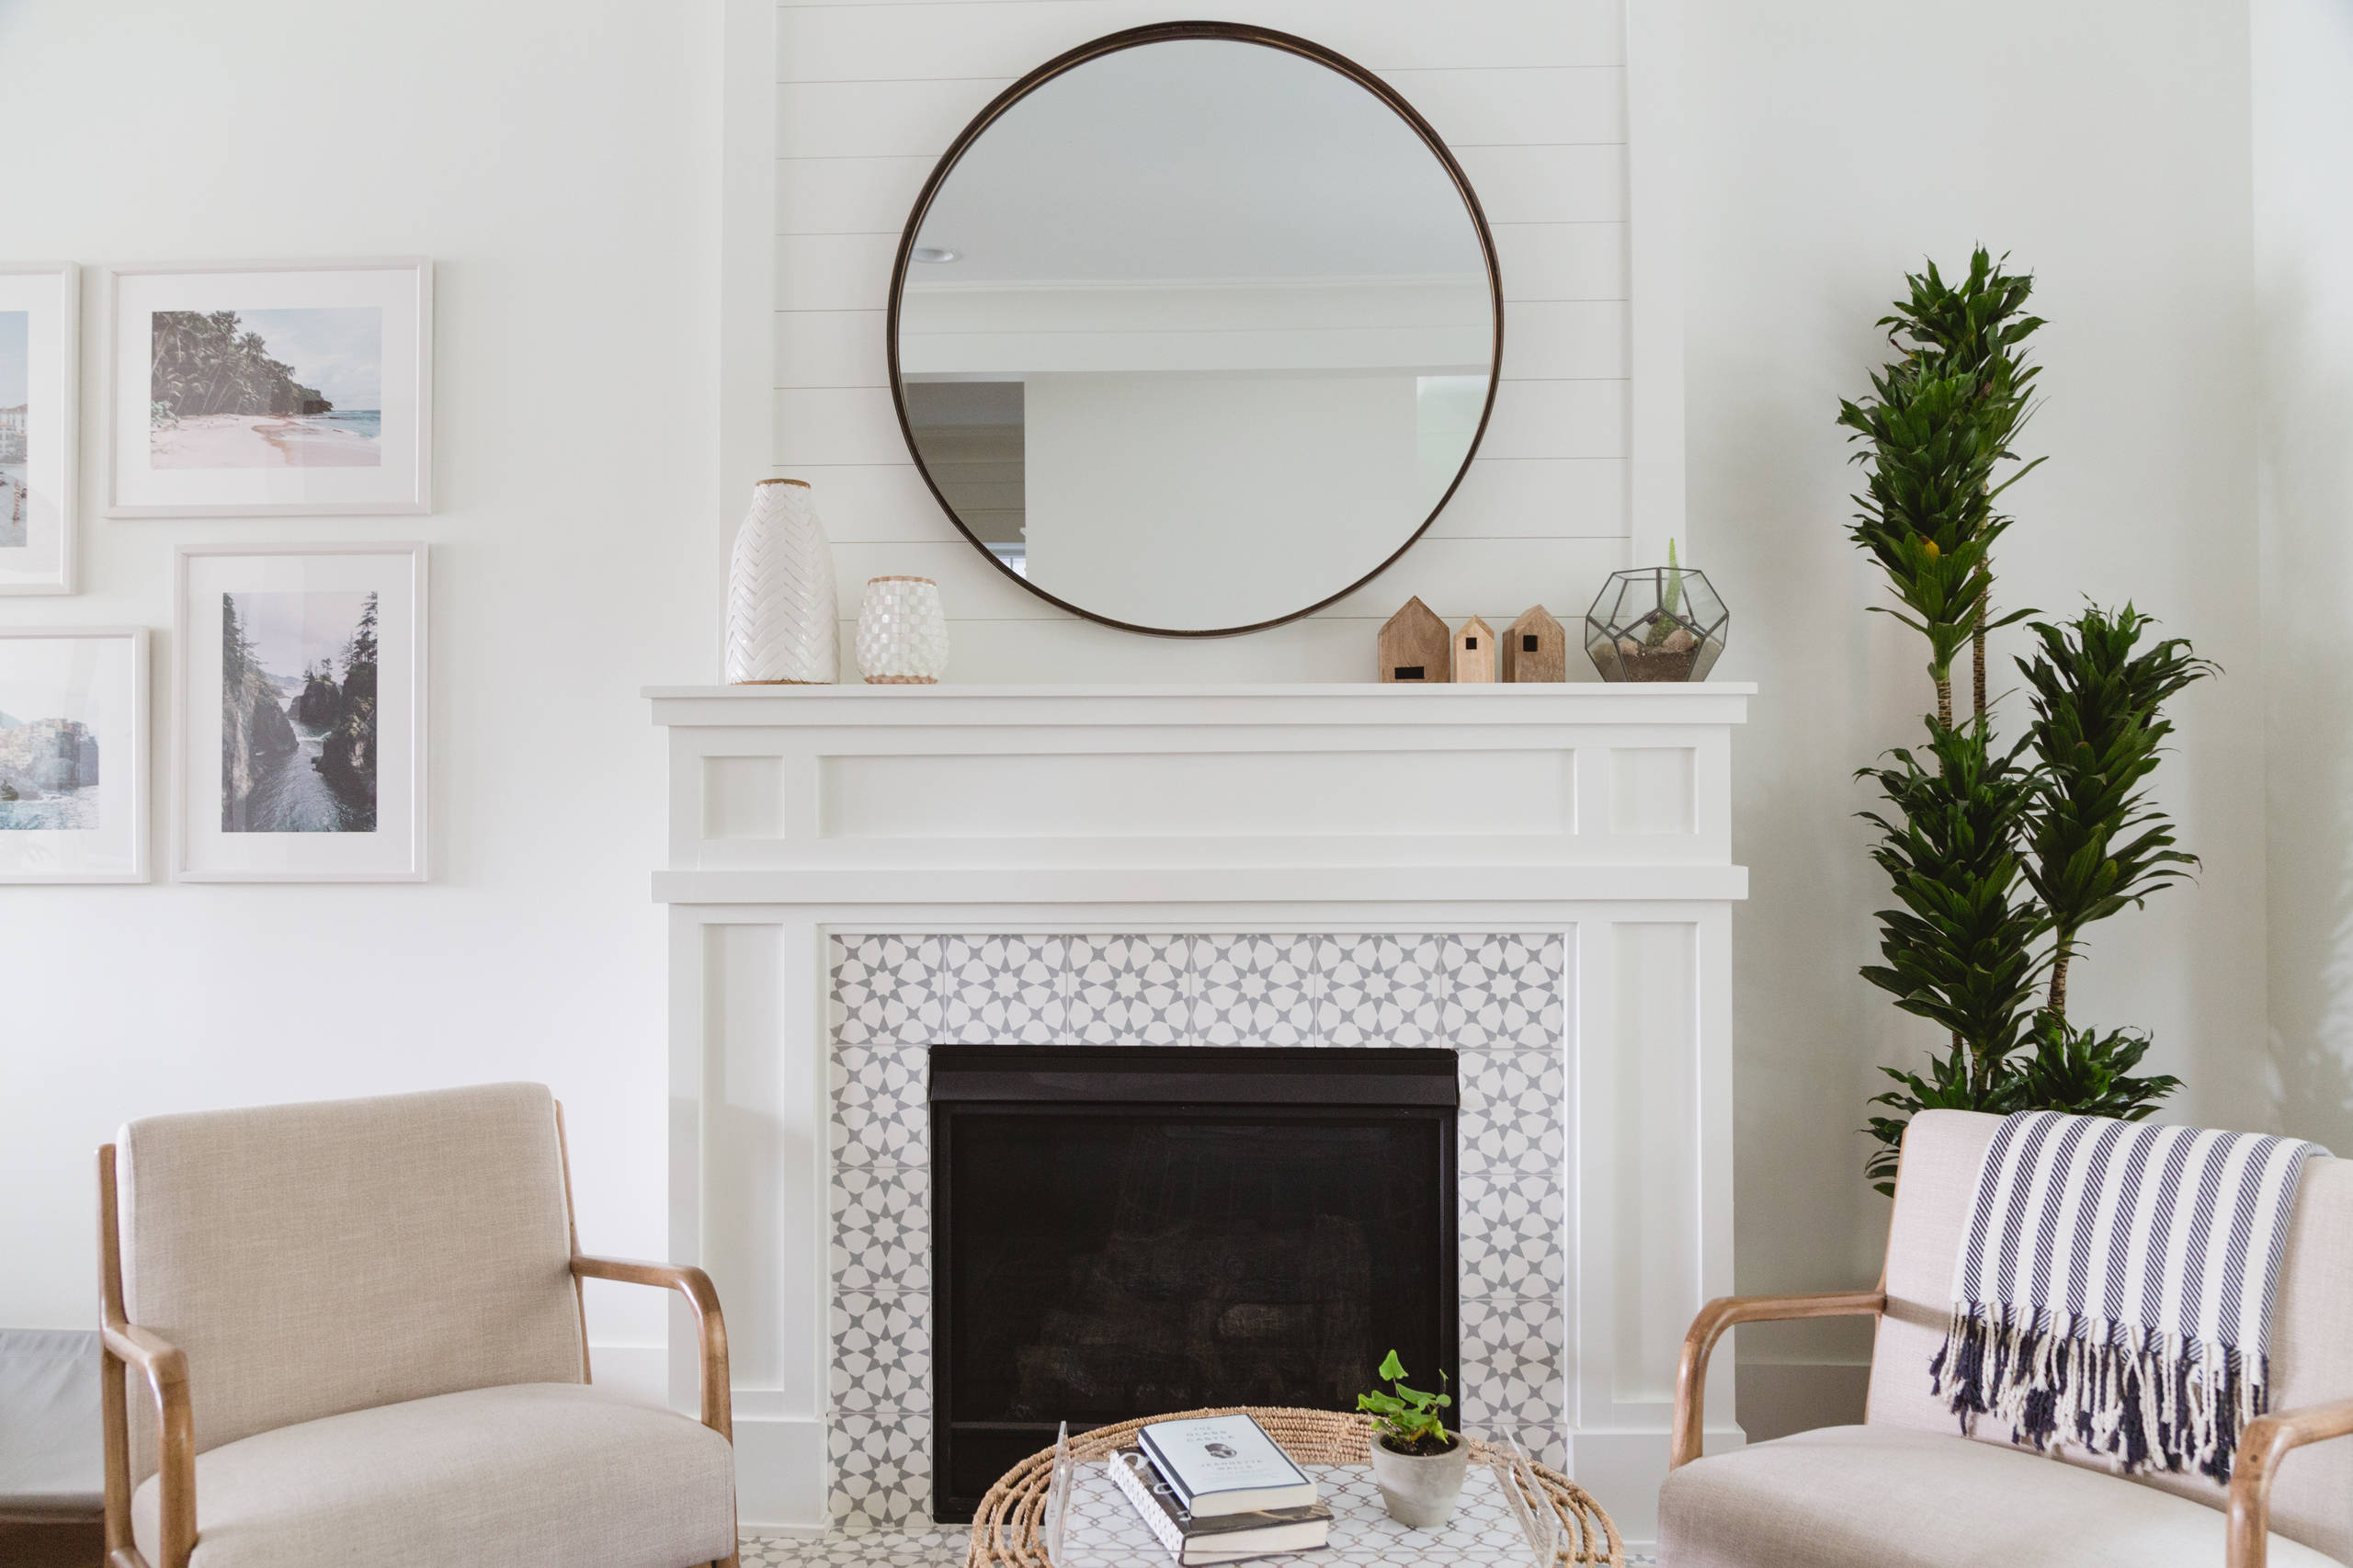 Make your home appealing for any taste (from Houzz)